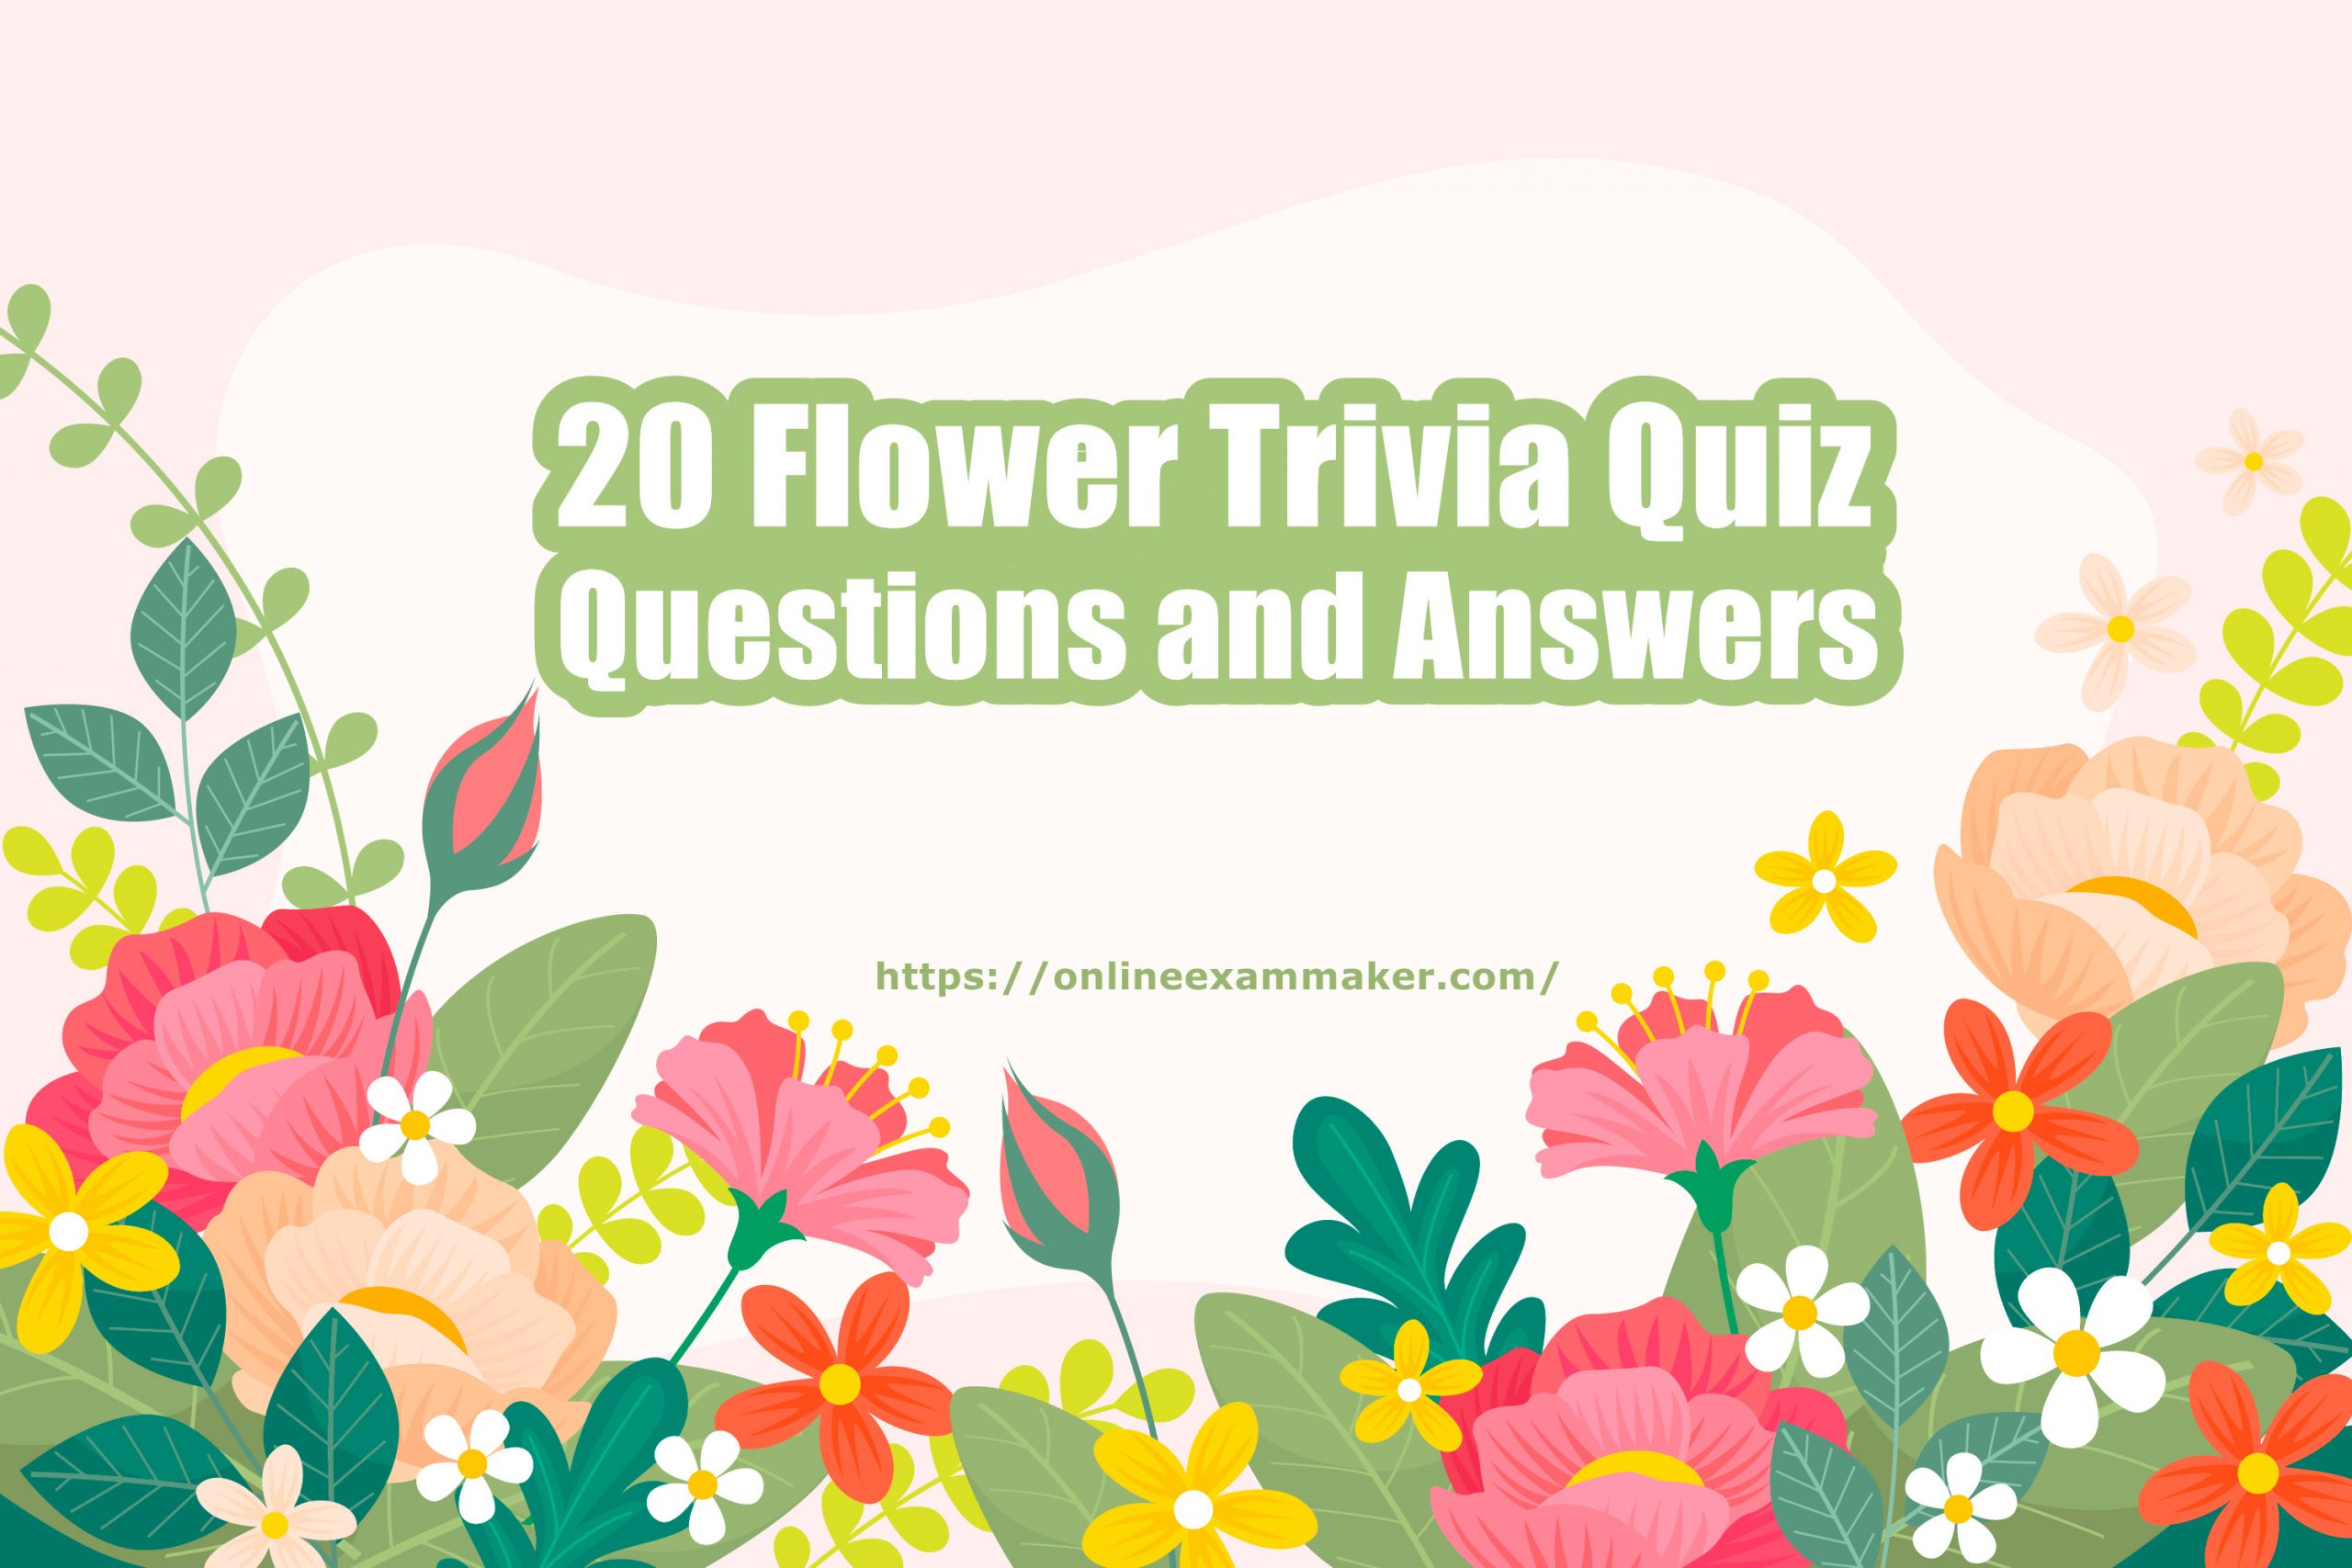 20 Flower Trivia Quiz Questions and Answers